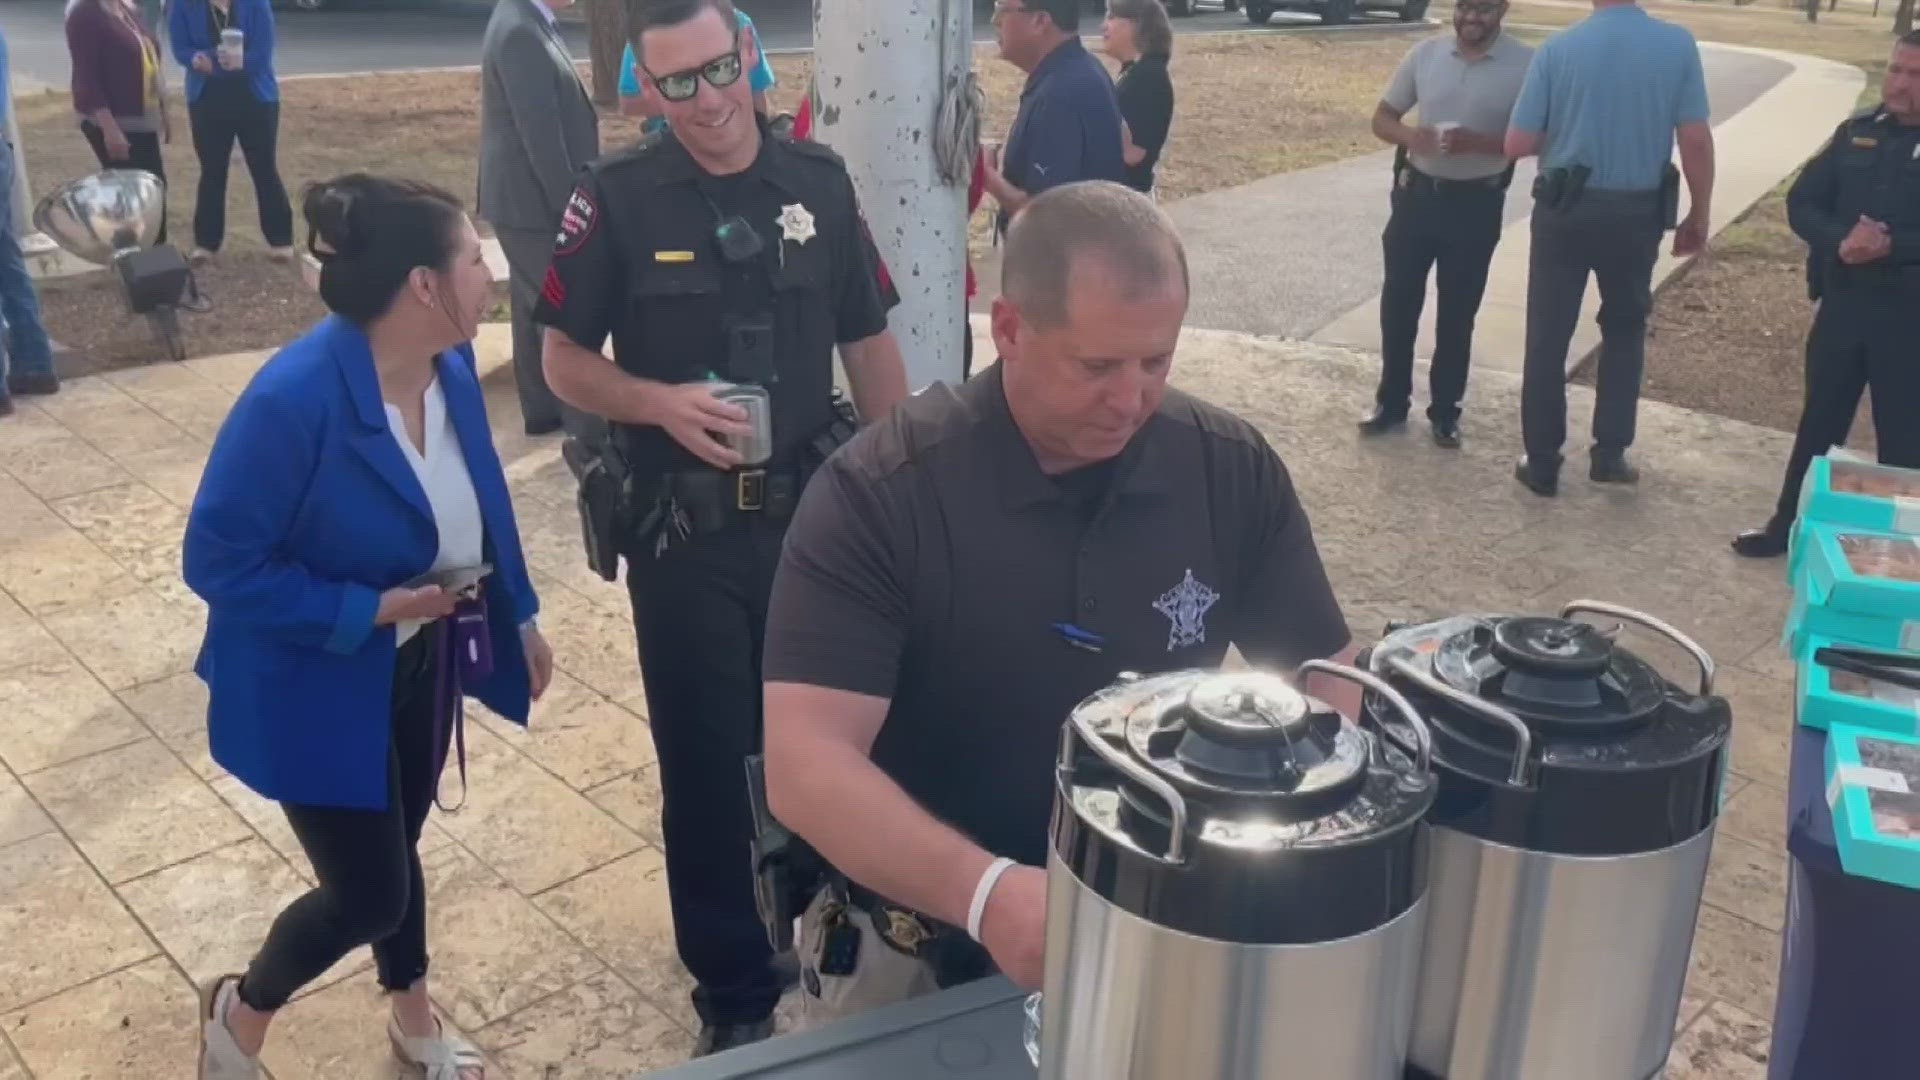 The event kicked off National Police Week with a chance for the community to get to know the officers keeping them safe.